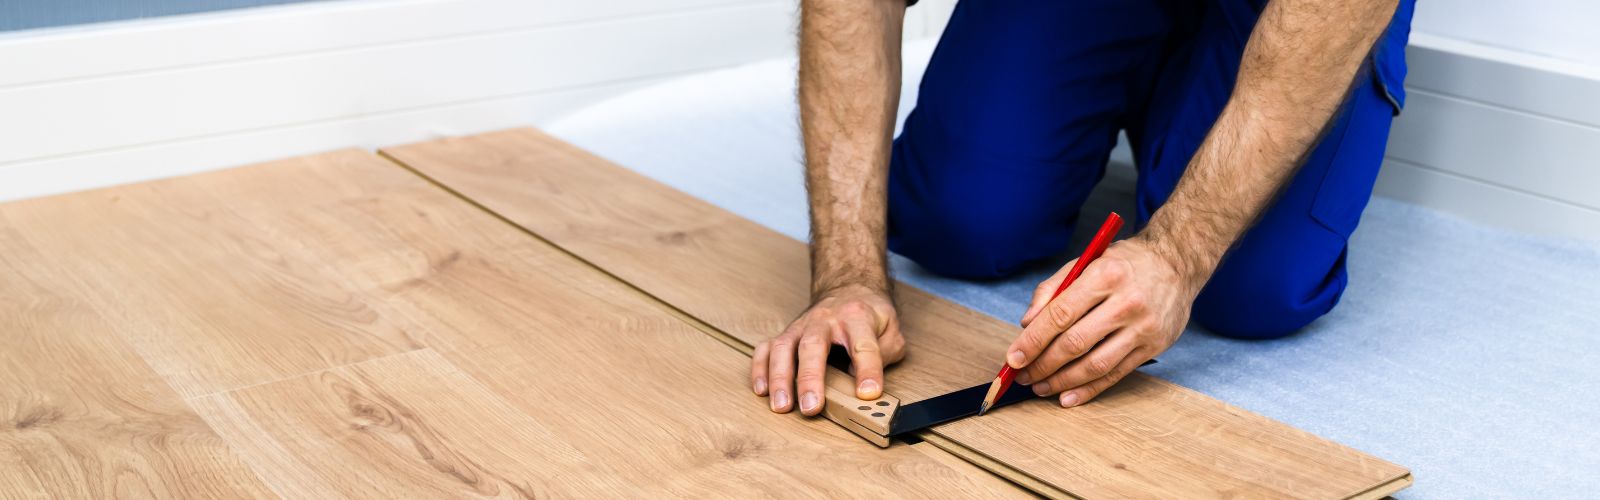 How To Prepare Your Home For Flooring Installation